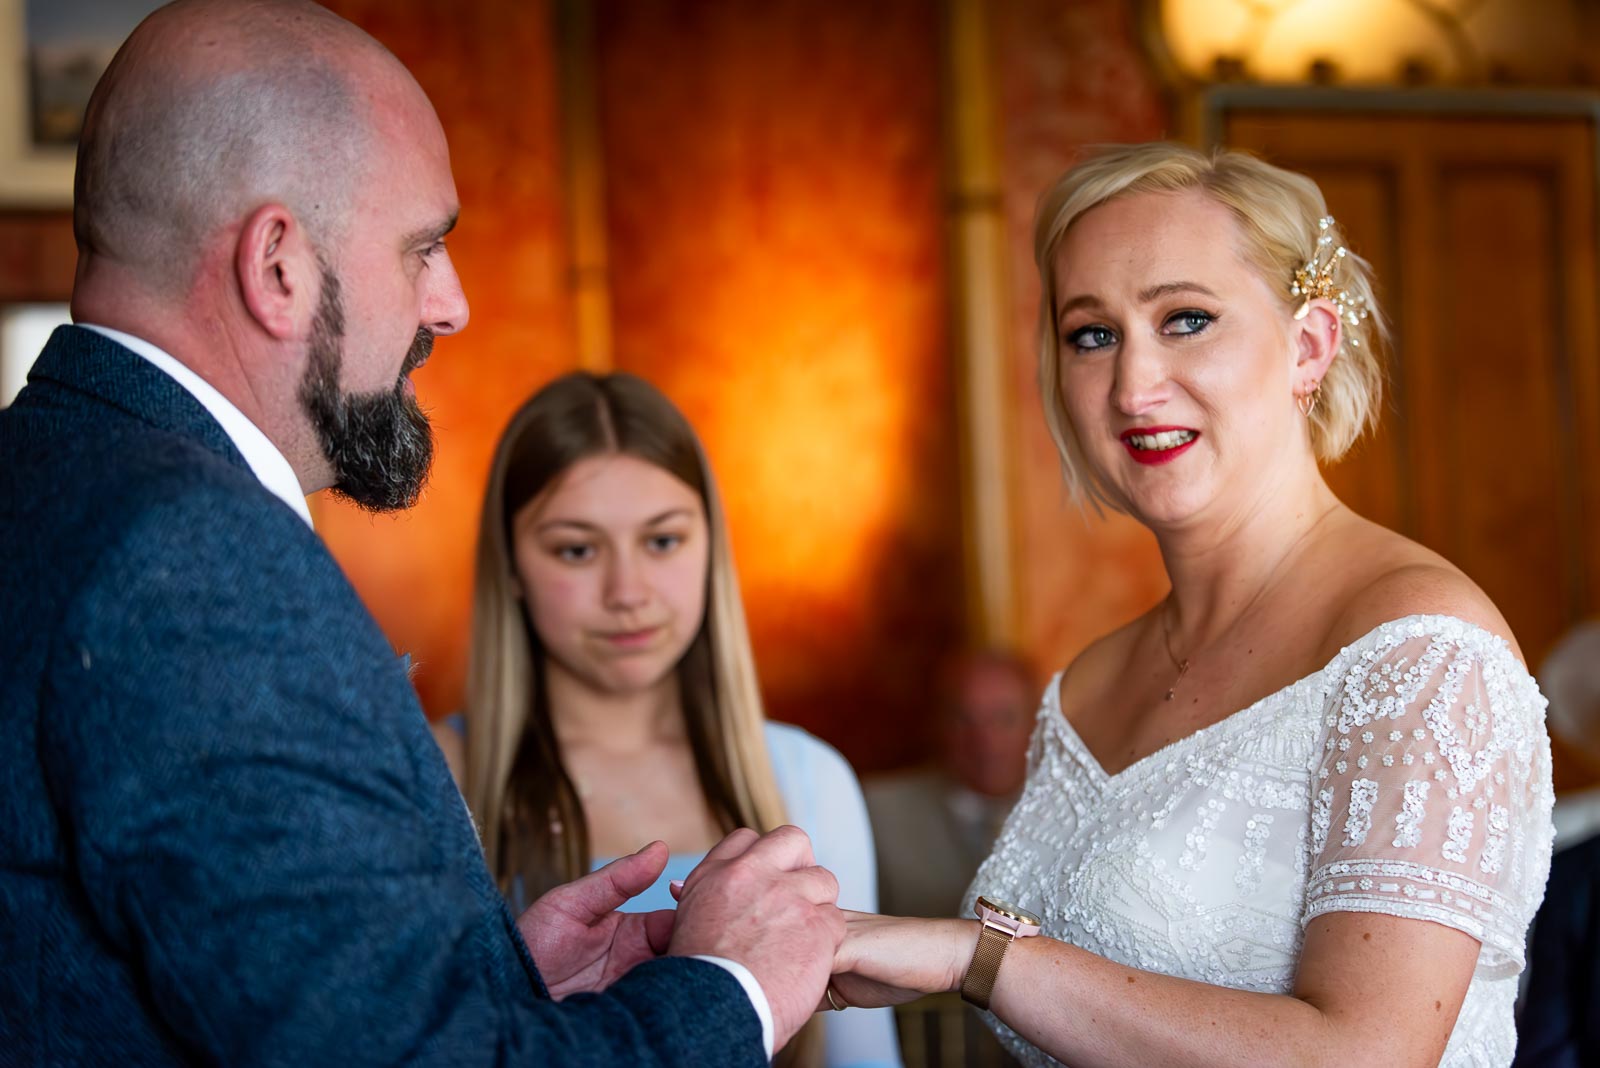 Georgina gives her vows during the exchanging of rings during her wedding to Andy at The Red Drawing Room in Brighton Royal Pavilion.